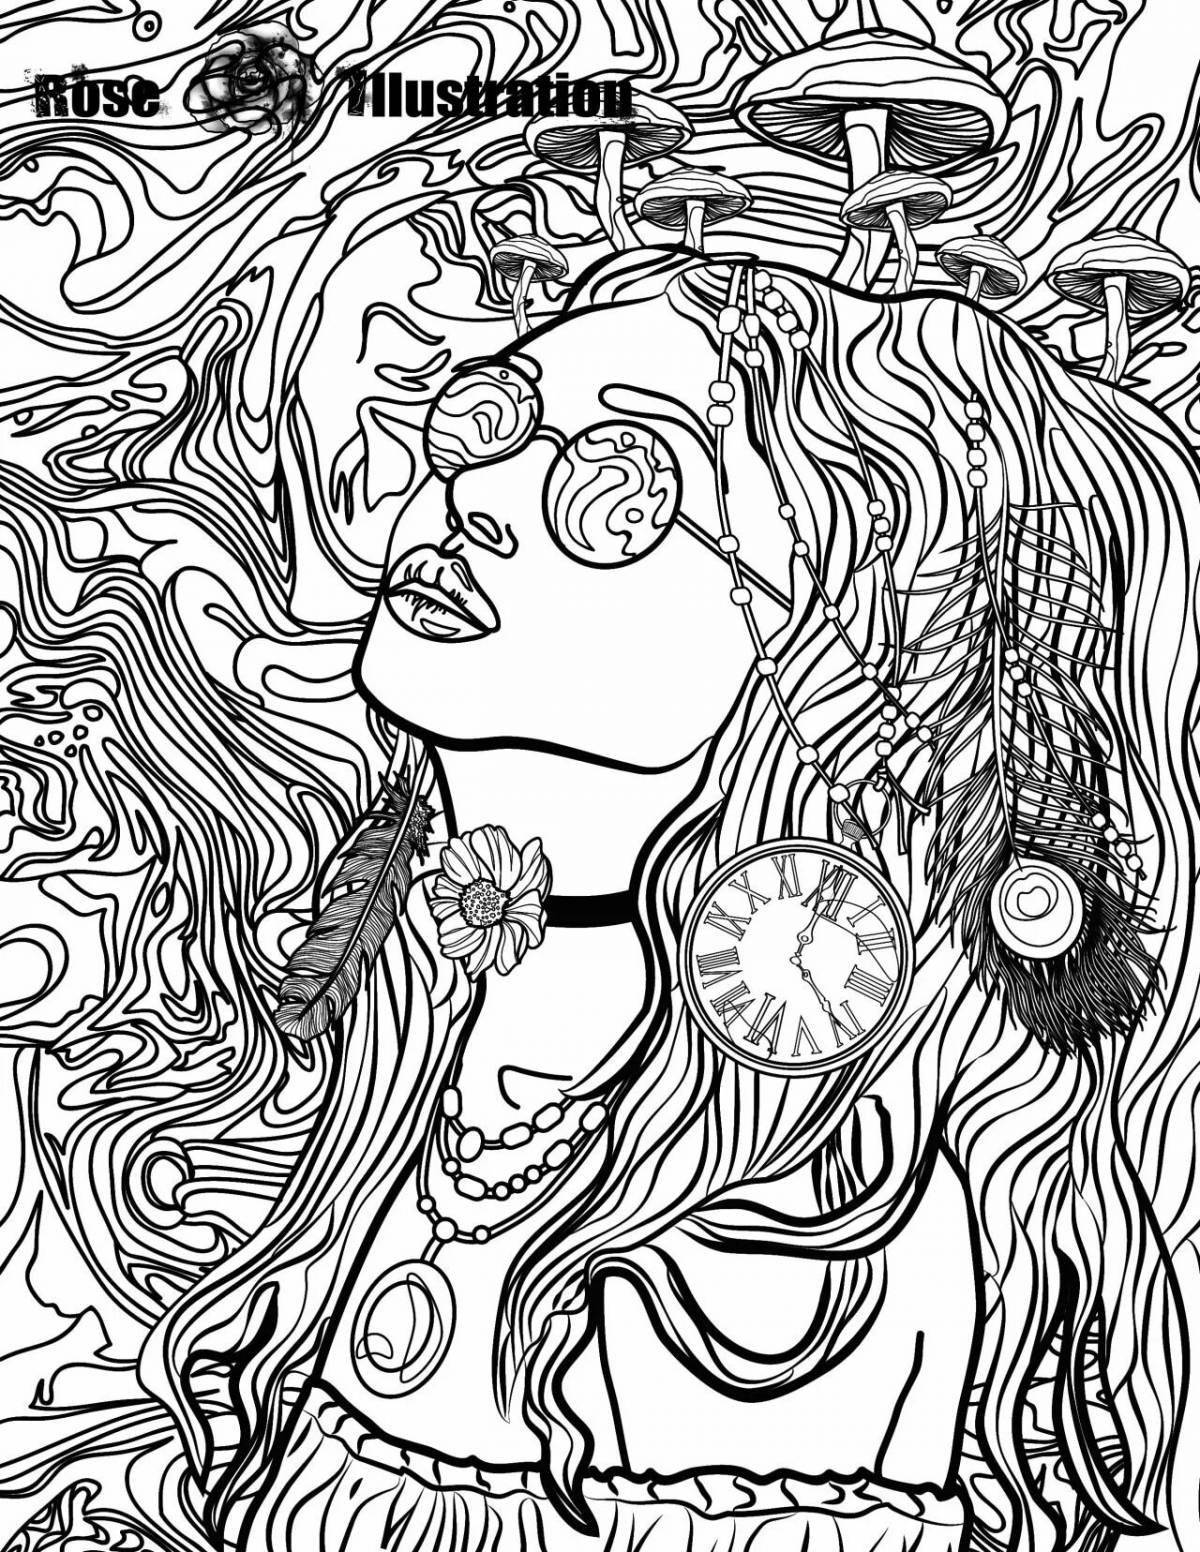 Magic psychedelic coloring book